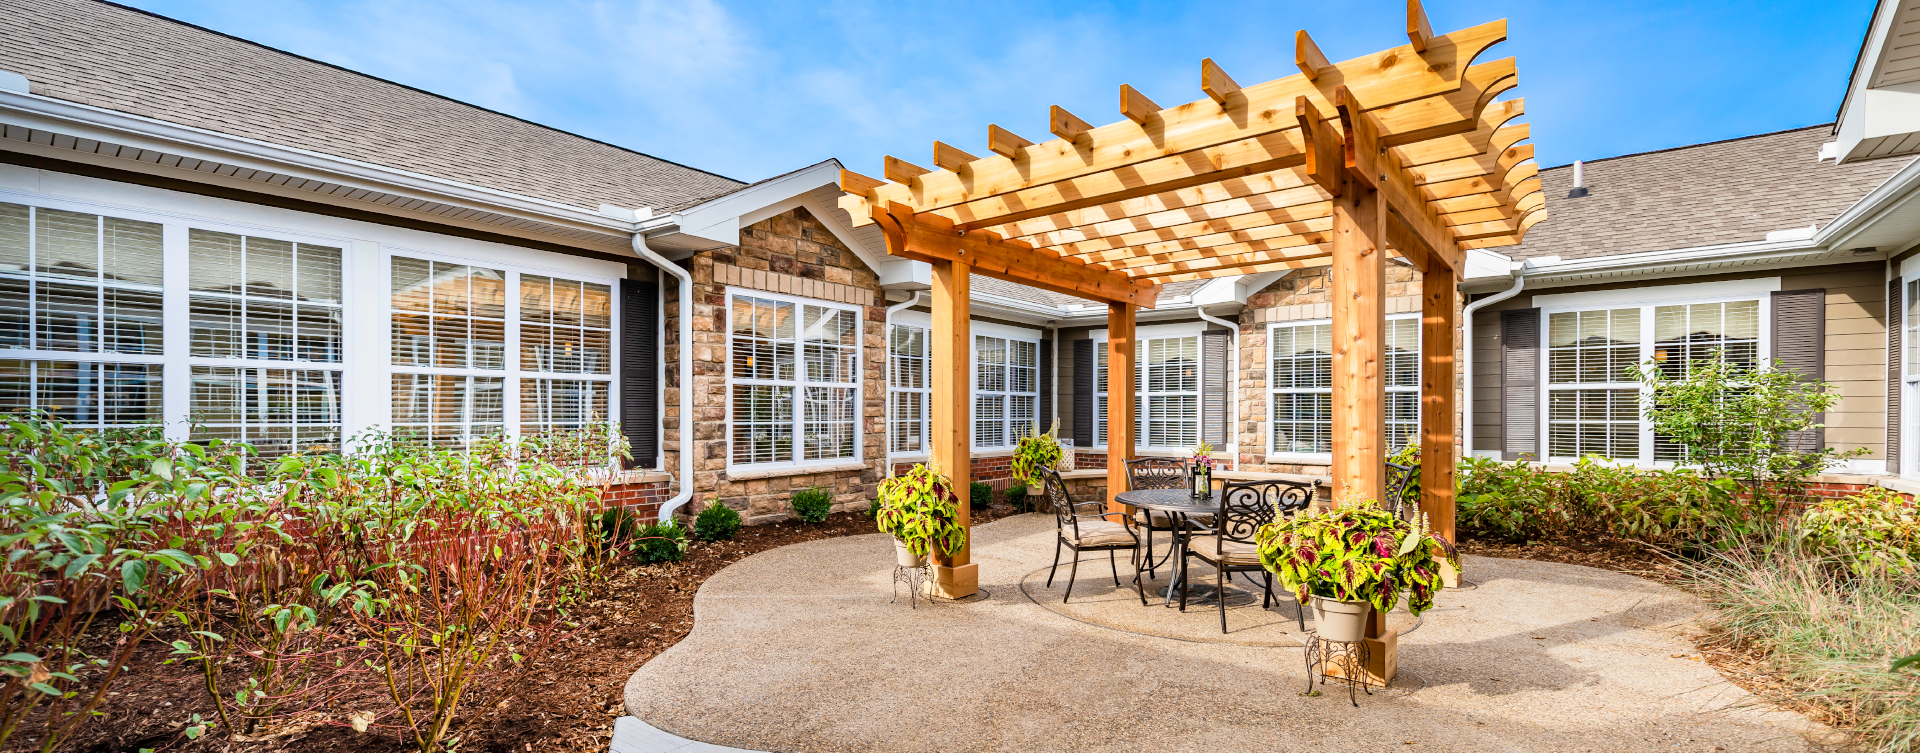 Residents with dementia can enjoy a traveling path, relaxed seating and raised garden beds in the courtyard at Bickford of Shelby Township